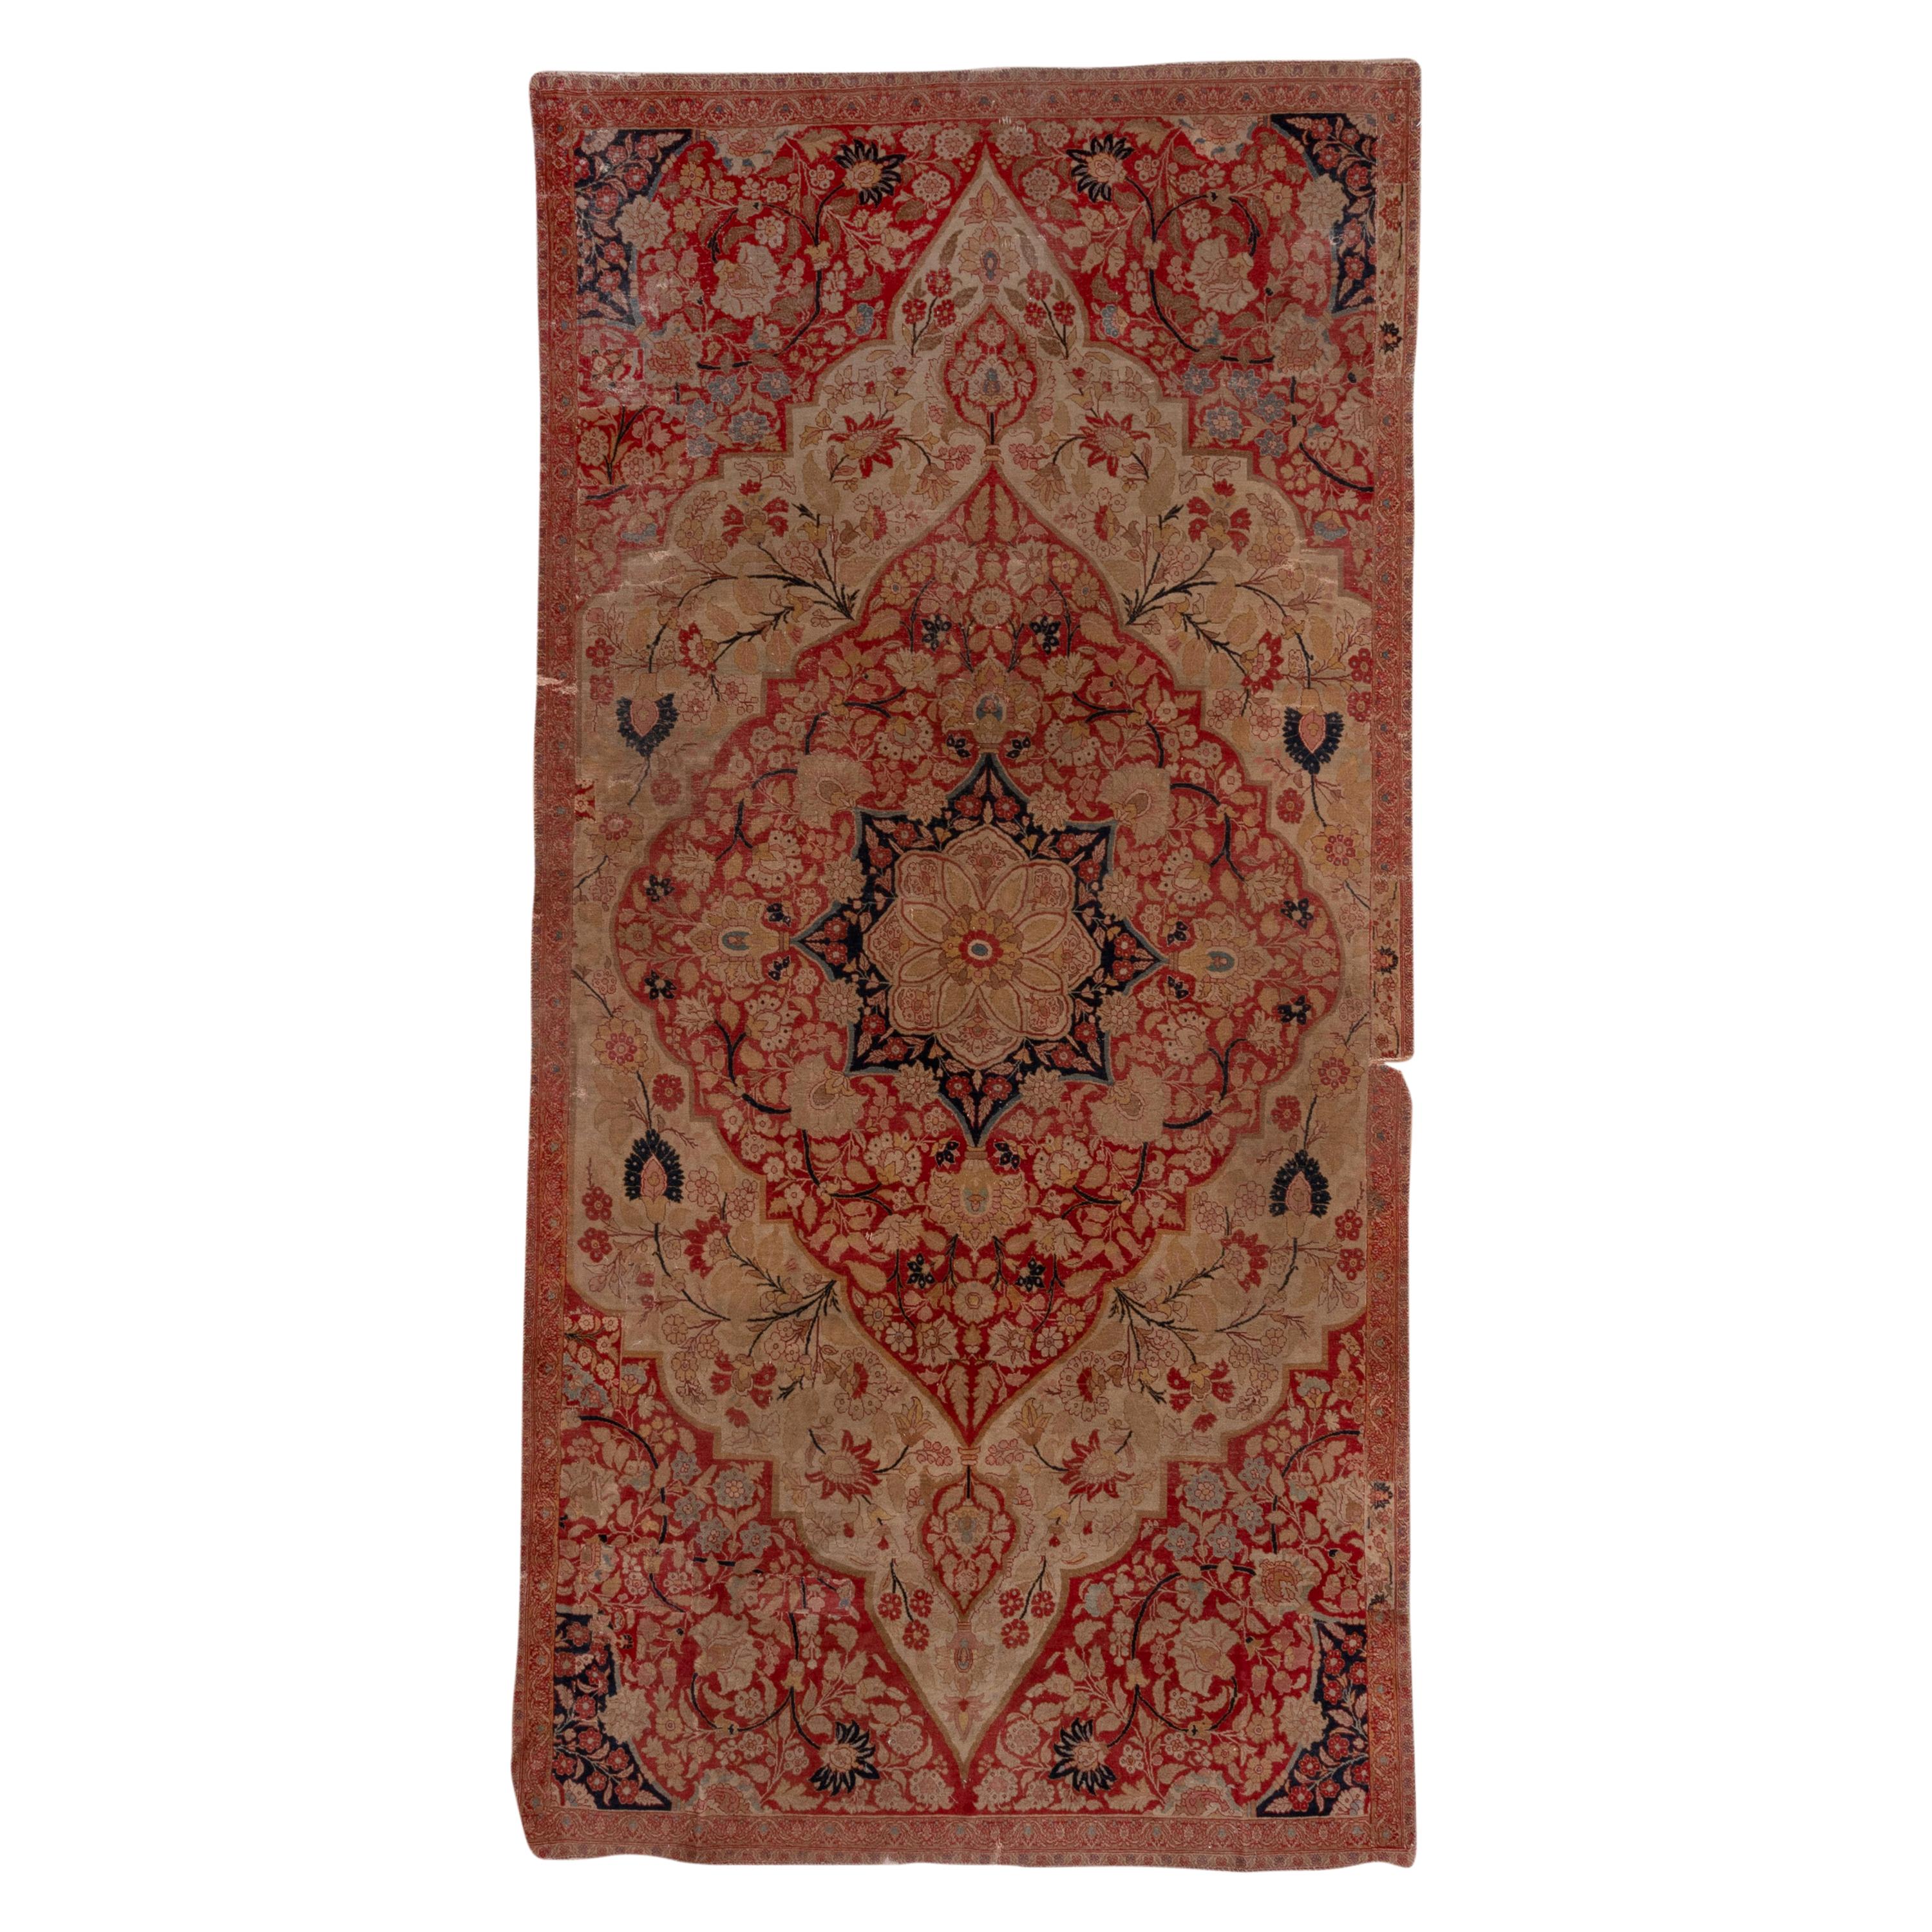 Antique Tribal Persian Tabriz Gallery Carpet, Red and Ivory Field